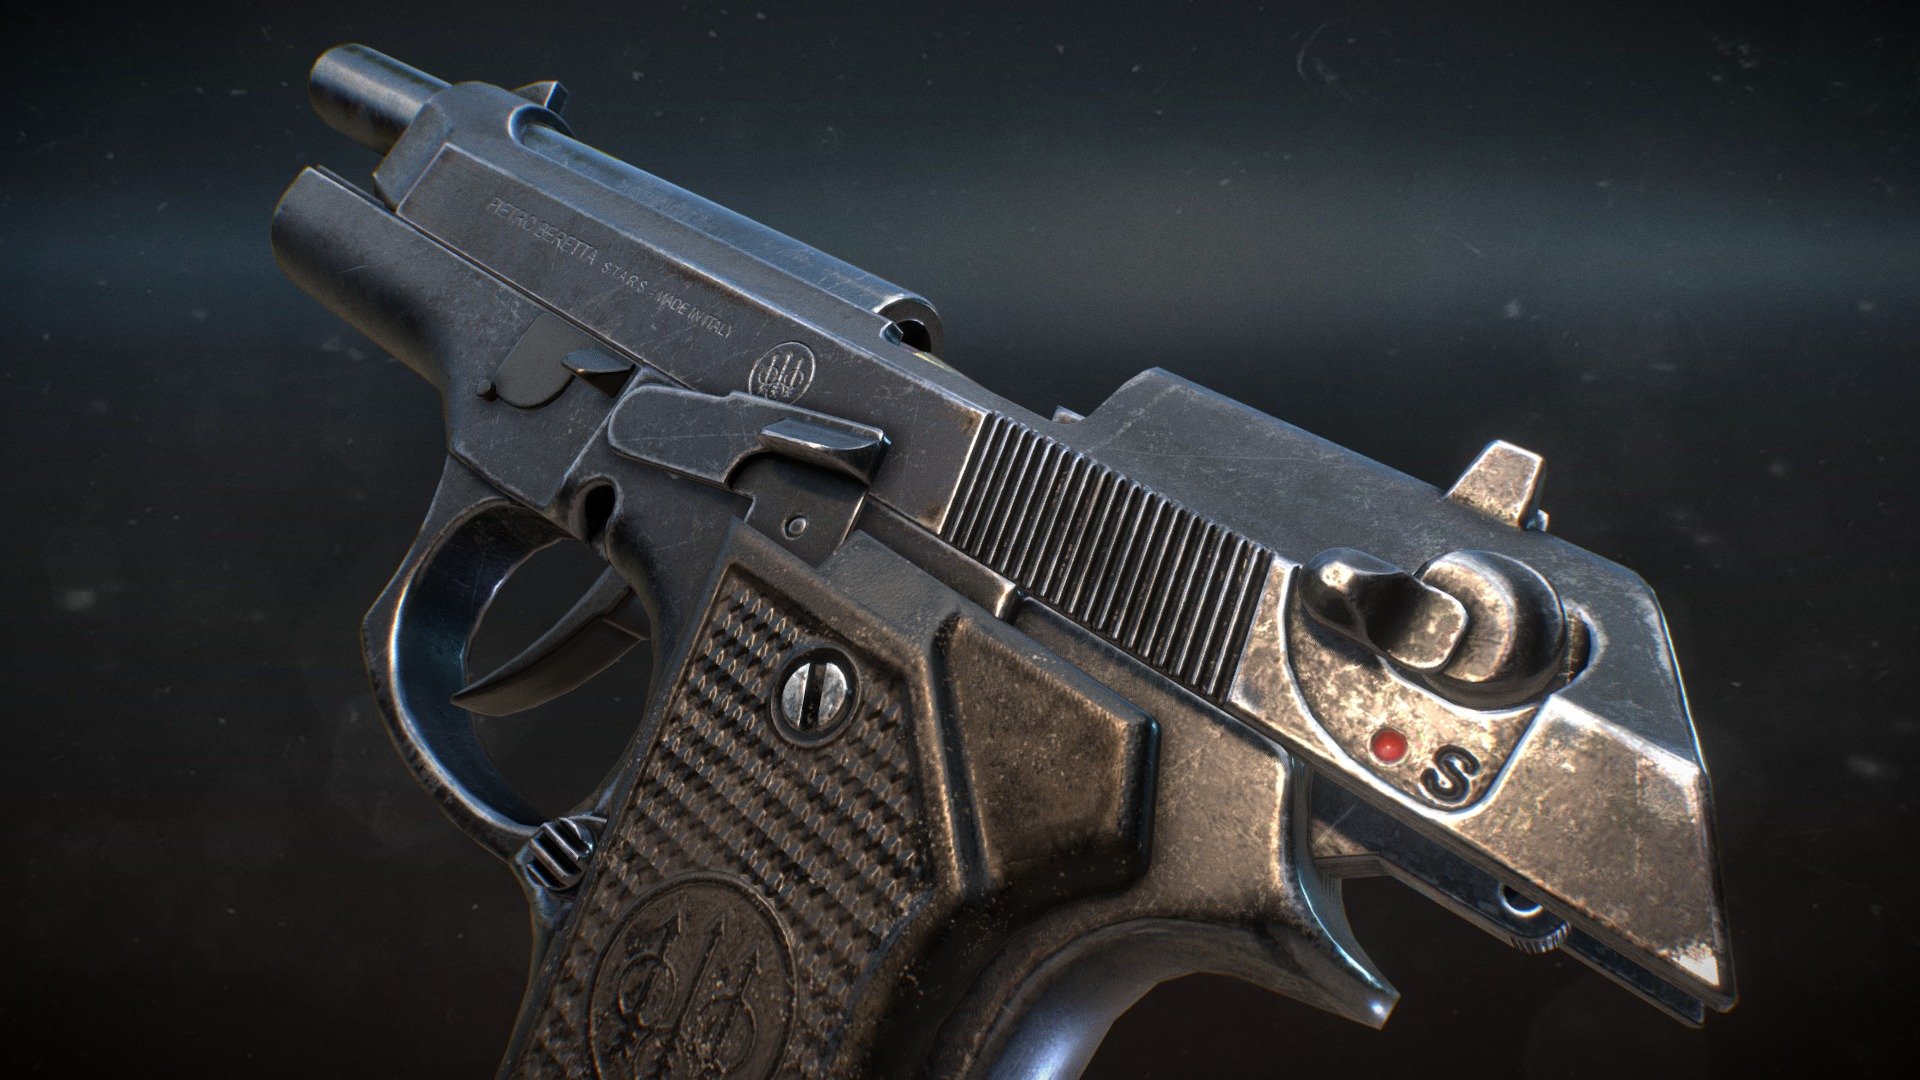 Main
Beretta 92f
VR game ready mesh and textures. 
High resolution textures out of Substance Painter.

Texture
PBR 4k textures in .tga format.
Unreal Metalness: BaseColor, Normal, Occl/Rough/Metal 
Unity Metallic: Albedo/Transp, Normal, Metallic/Smooth

Mesh
Mesh has 11.402 tris and is ready for rigging and import.
.ma/.fbx/.obj

General Information
This weapon is best used for VR experience due to it´s high details.
All parts which can move are seperate and ready for rigging and import. 
The whole Beretta is using one texture set including the shell/bullet ammunition.

Naming convention
Mesh: WeaponName_PartName_Number/Low
Material: M_WeaponName
Textures: WeaponName_Type - Beretta 92 / VR ready - 3D model by trigon-art.com (@iammalte) 3d model